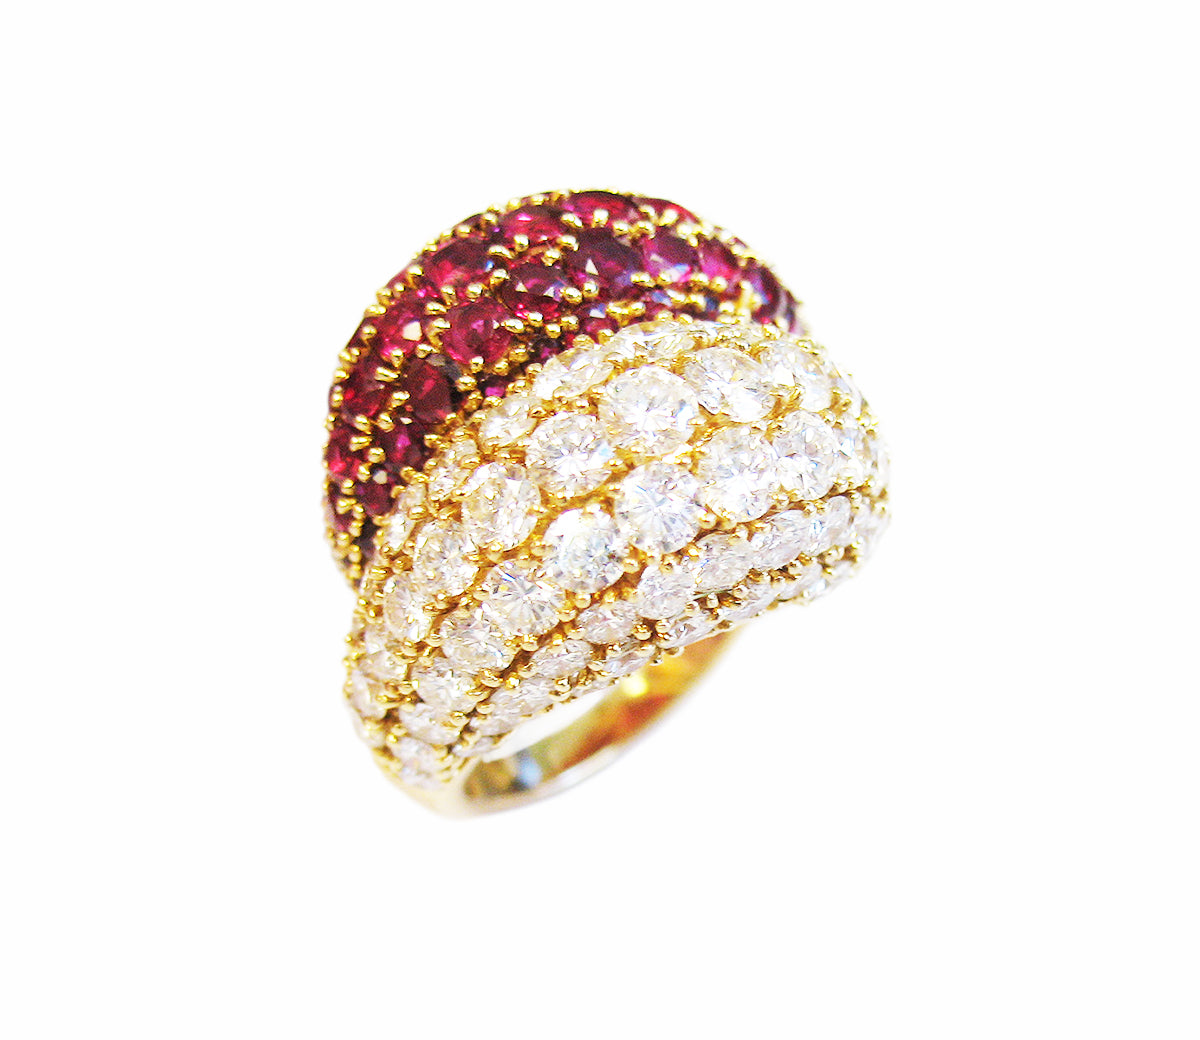 example of a boule ring